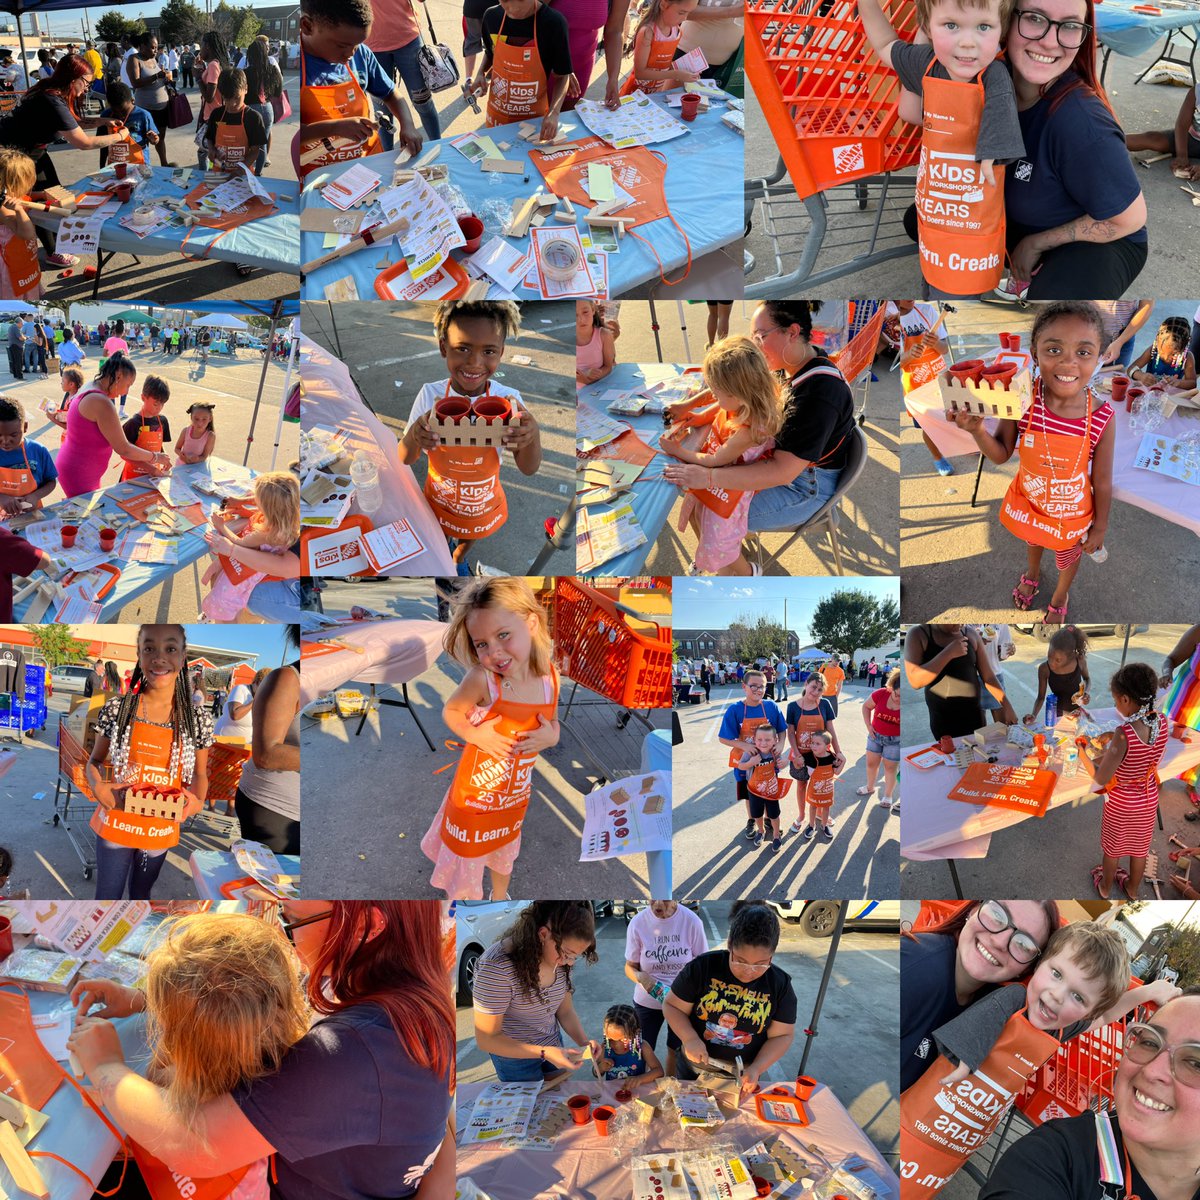 Shout out to #homedepot4150 for having this event and for making me in charge of the kids workshop and shout of to @_Solmarie1404 for helping! It was a bunch of fun teaching these young workers how to build, even had my son come and join the fun!❤️❤️#homedepot #livingthedream